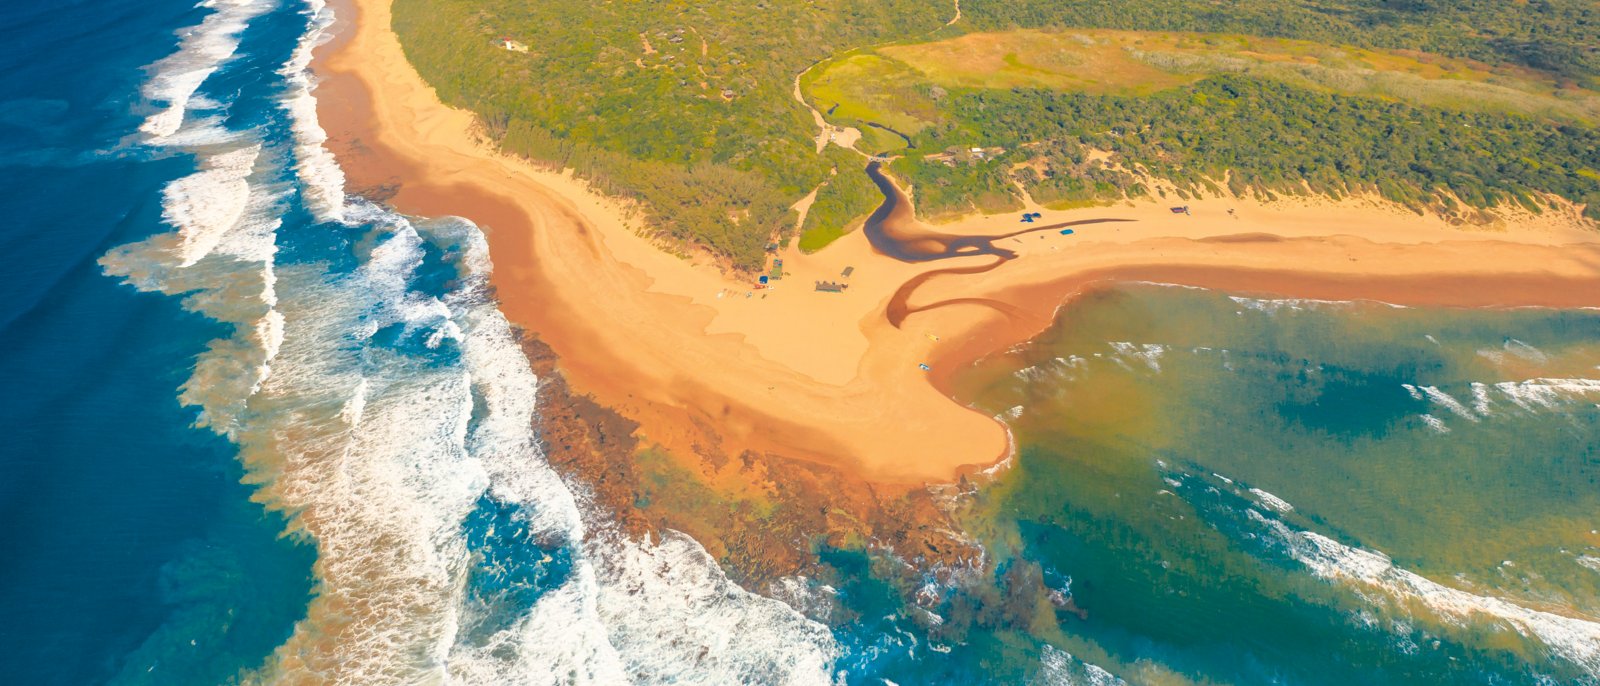 01 Aerial view of Sodwana Bay National Park within the iSimangaliso Wetland Park, Maputaland, an area of KwaZulu-Natal on the east coast of South Africa